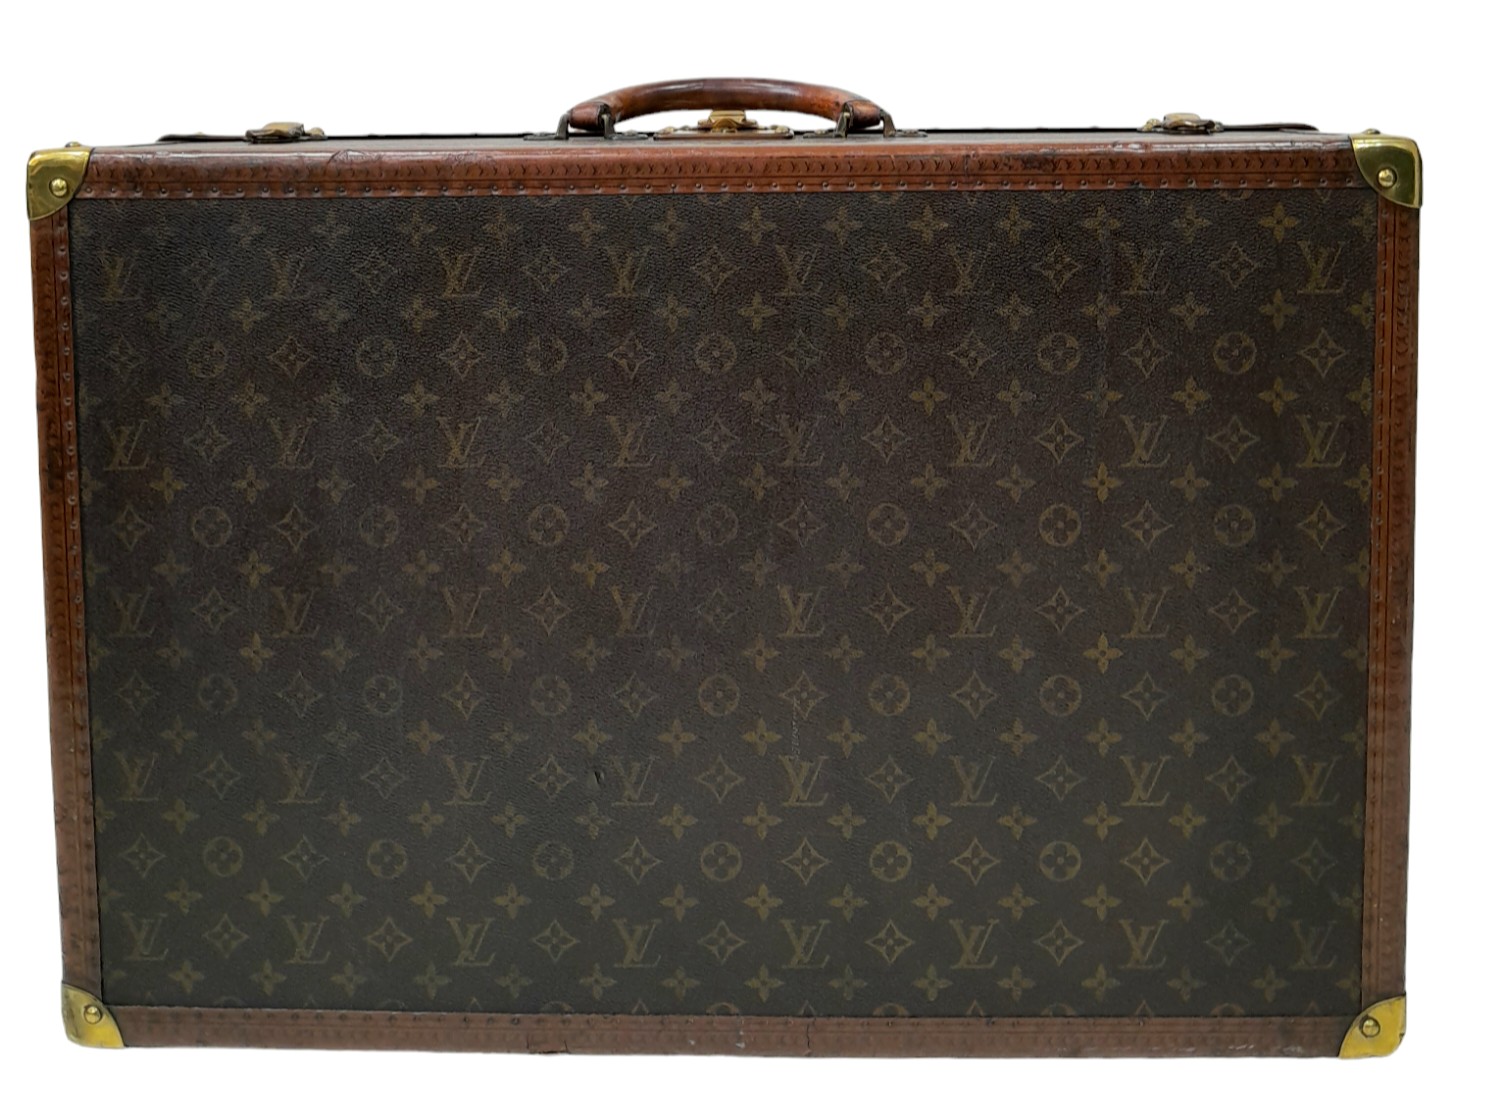 A Vintage Possibly Antique Louis Vuitton Trunk/Hard Suitcase. The smaller brother of Lot 38! - Image 2 of 12